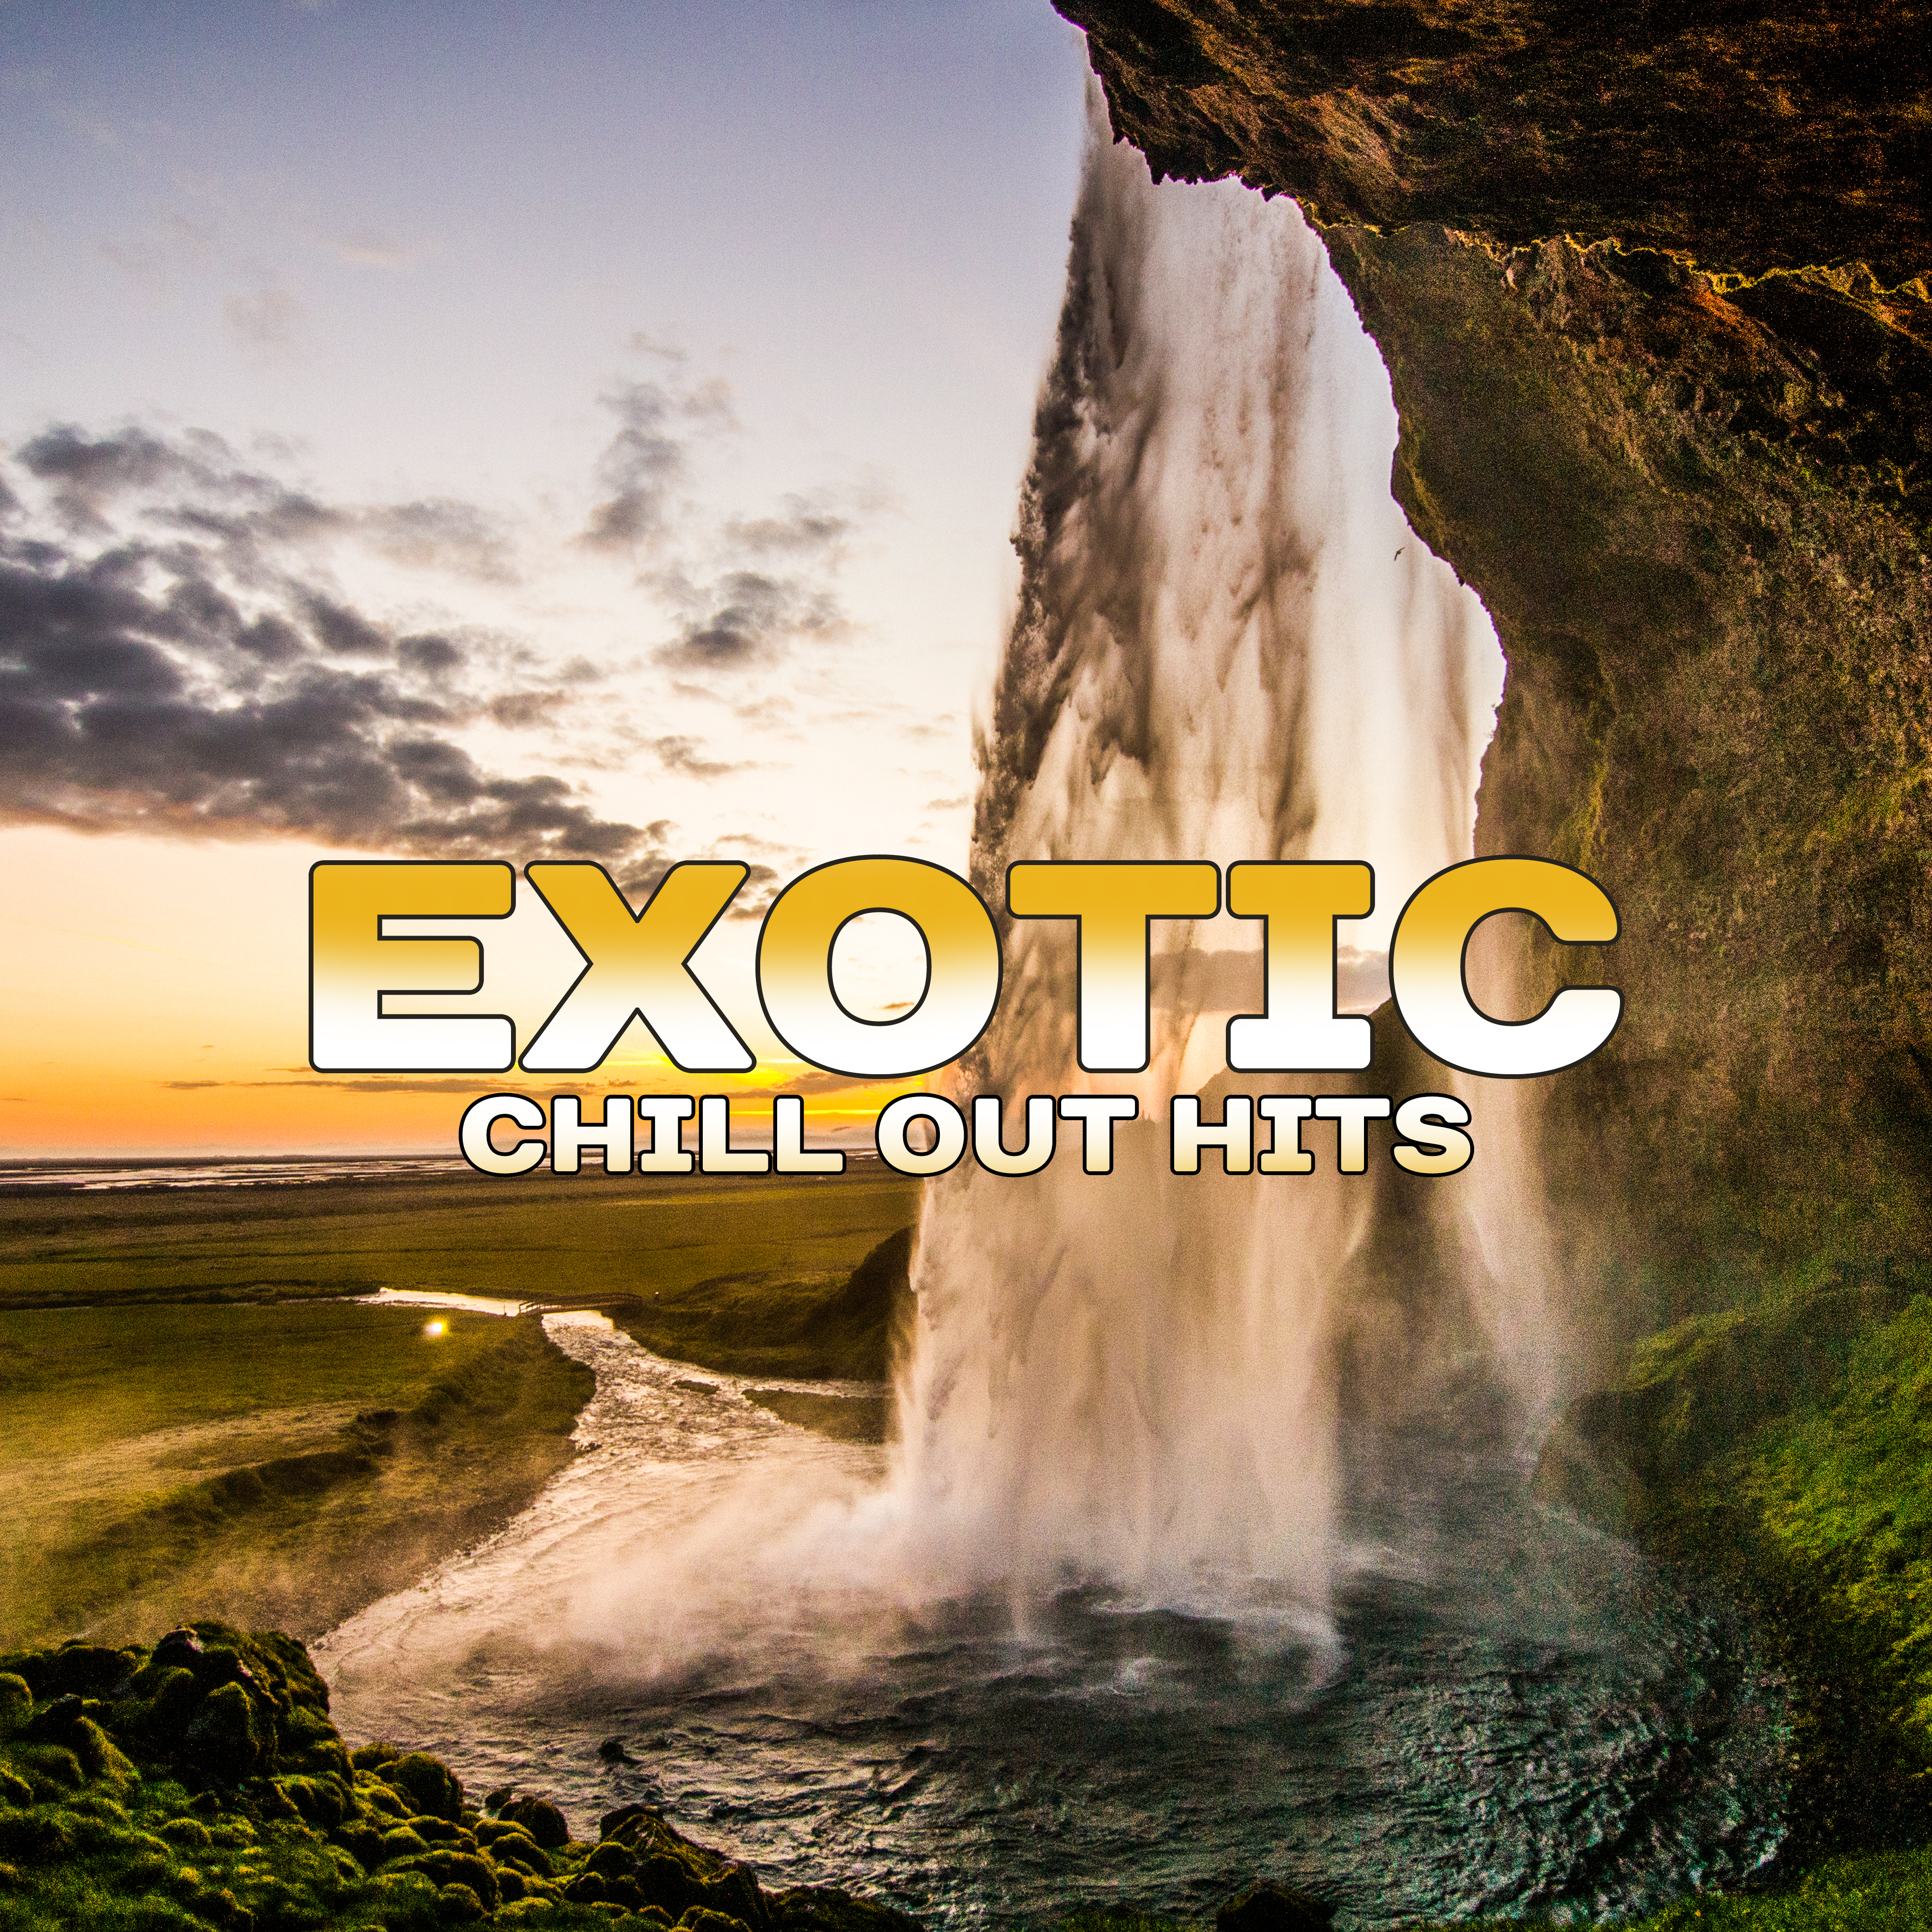 Exotic Chill Out Hits  Chill Out 2017, Relax Lounge, Chill Out Music, Electronic Beats, Todays Hits